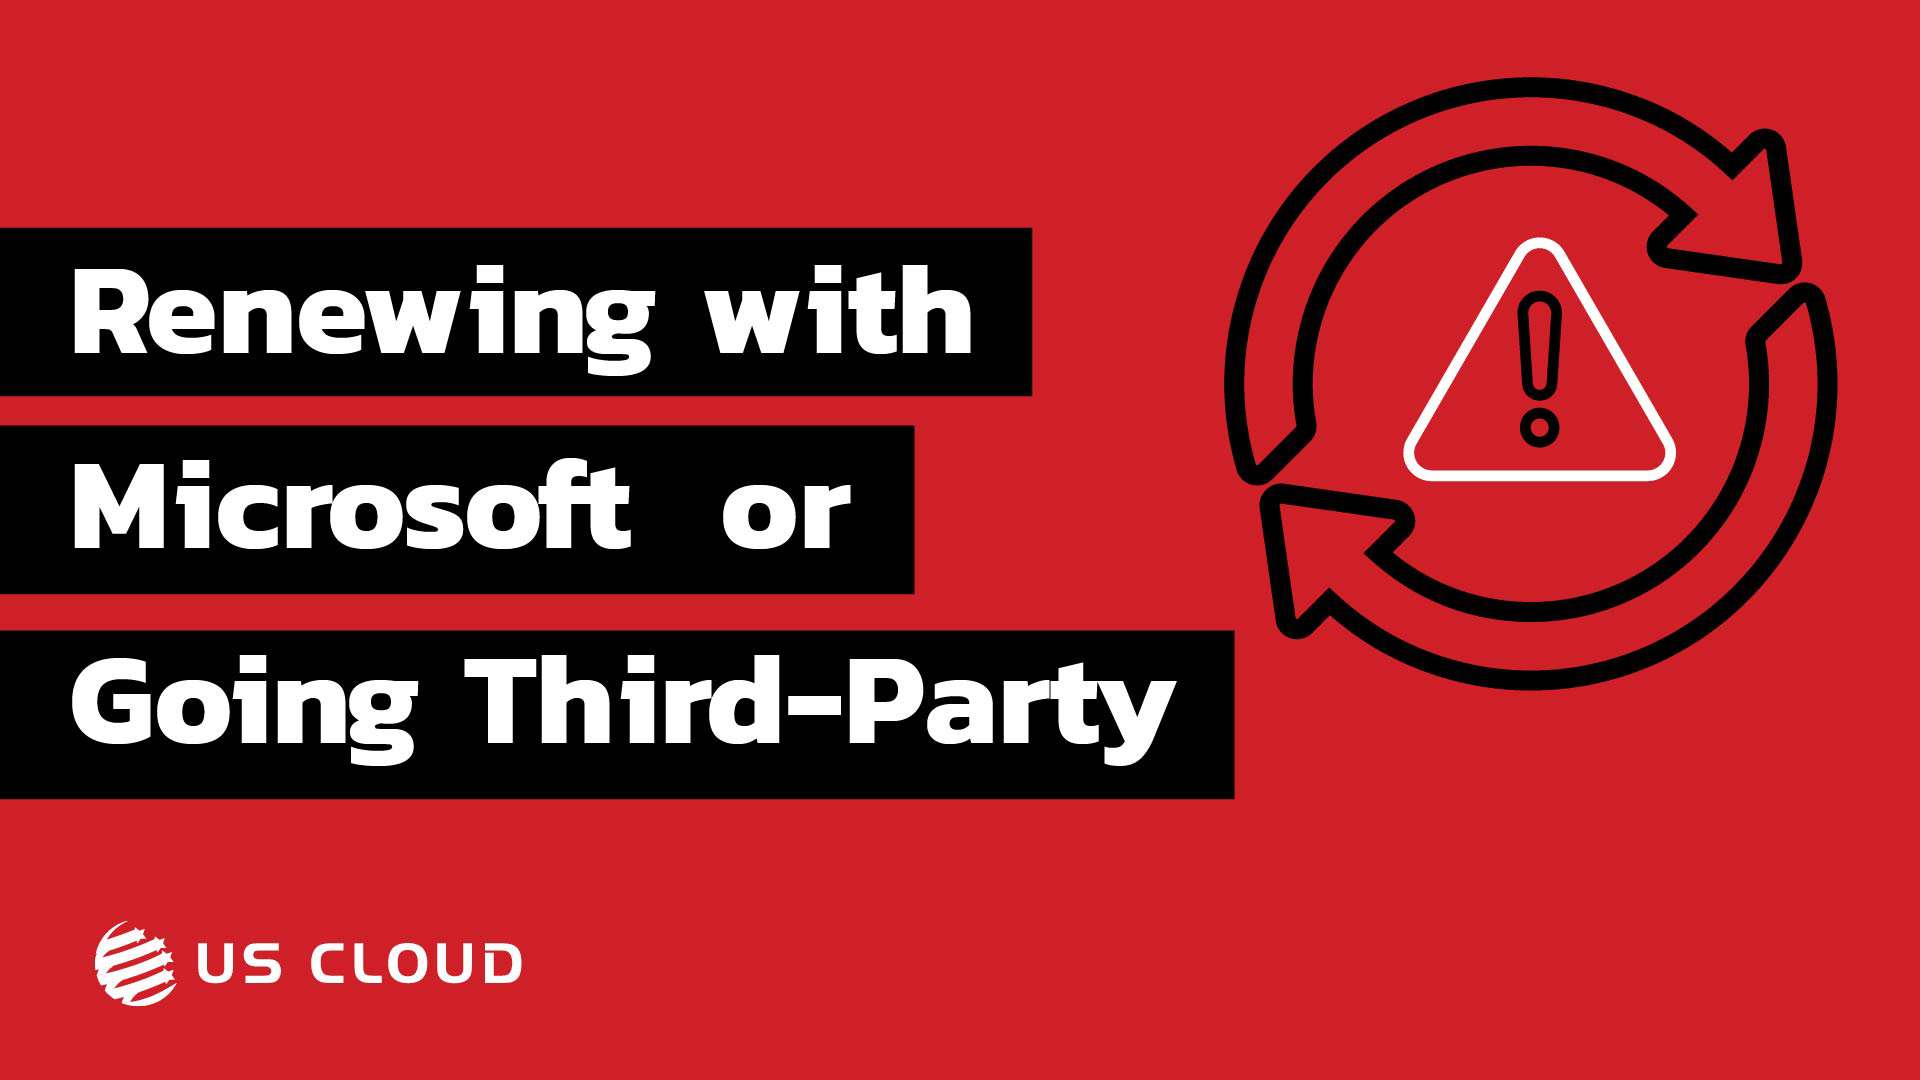 Renewing Your Microsoft Premier/Unified Support or Switching to Third-Party